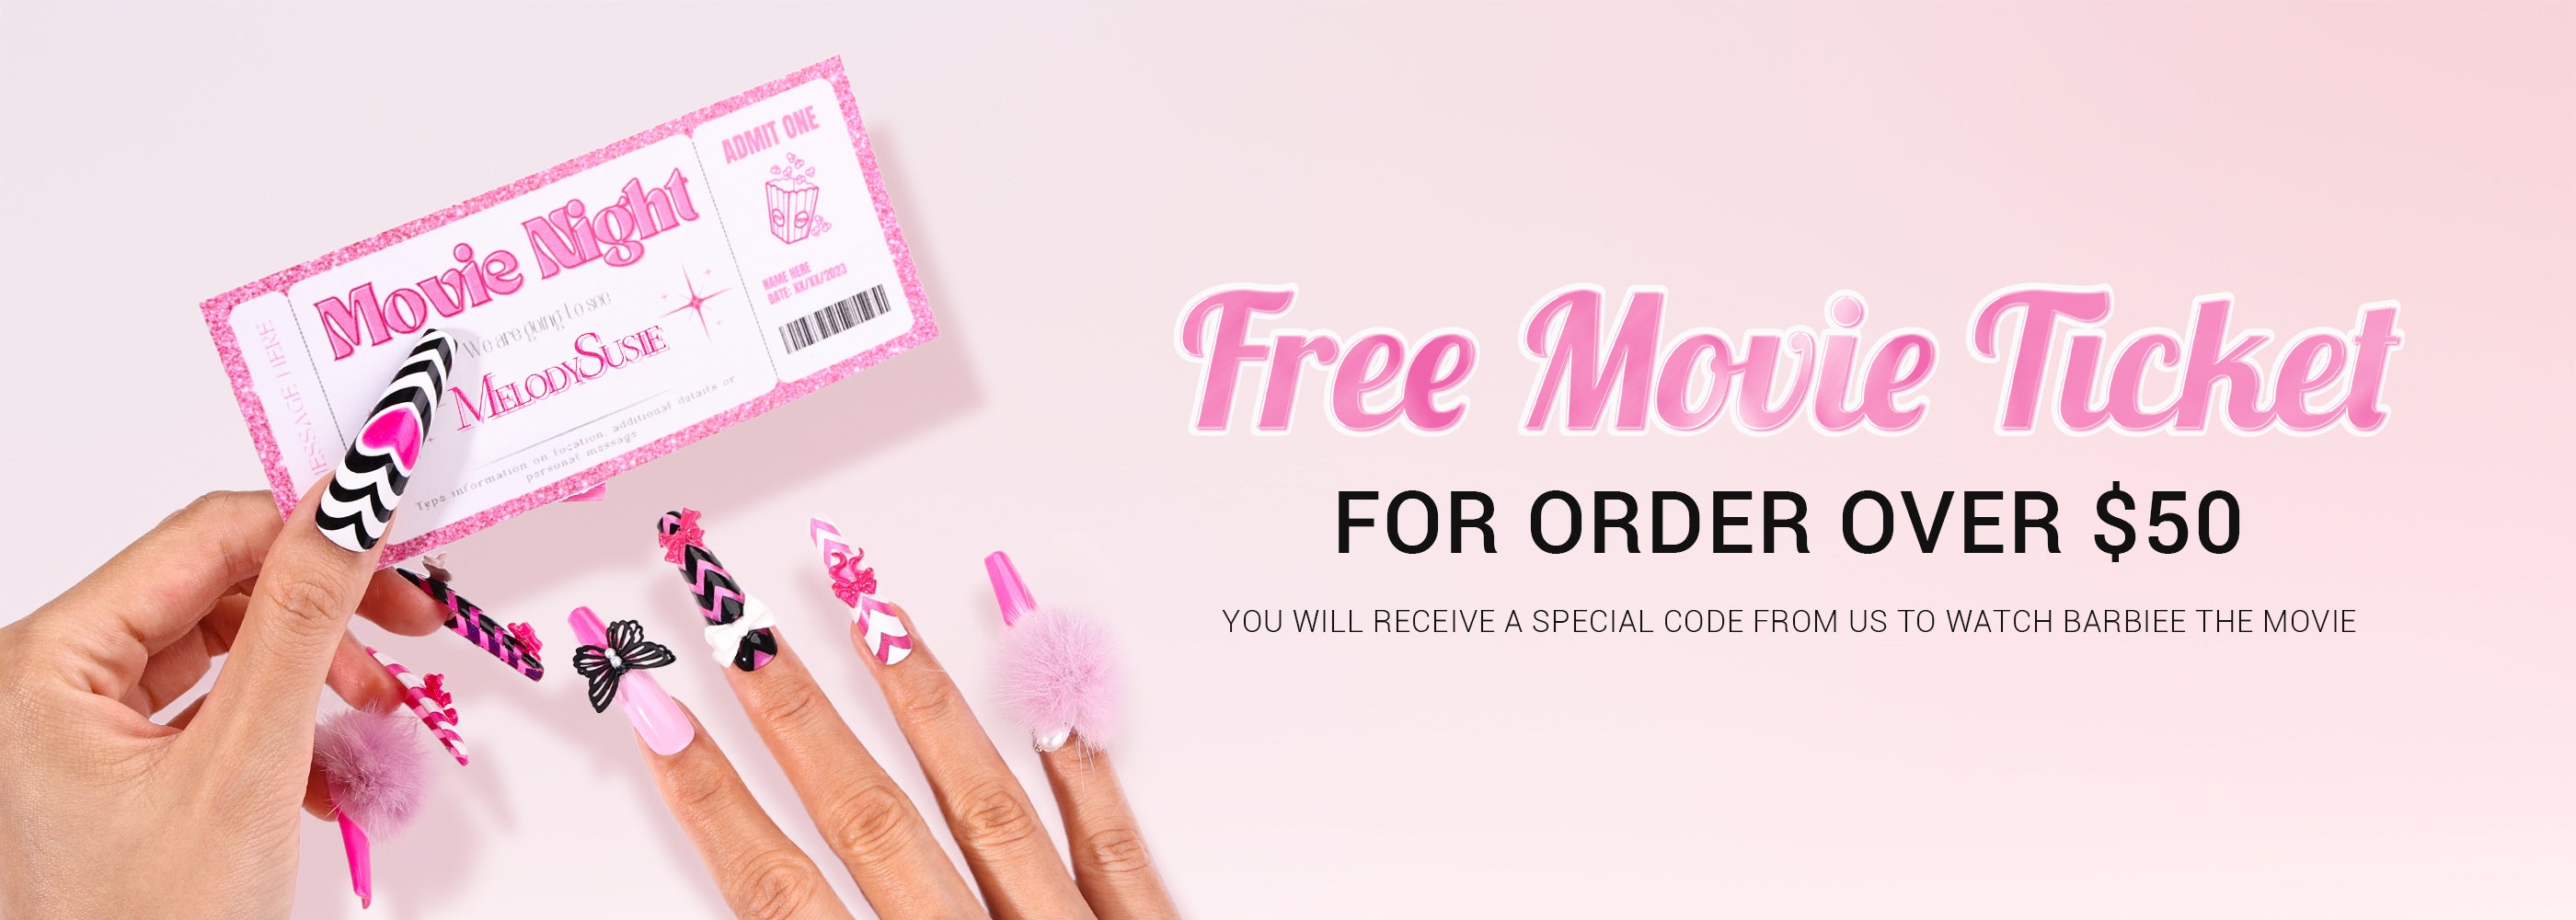 Free Movie Ticket For Handmade Press On Nails Order Over $50 | MelodySusie